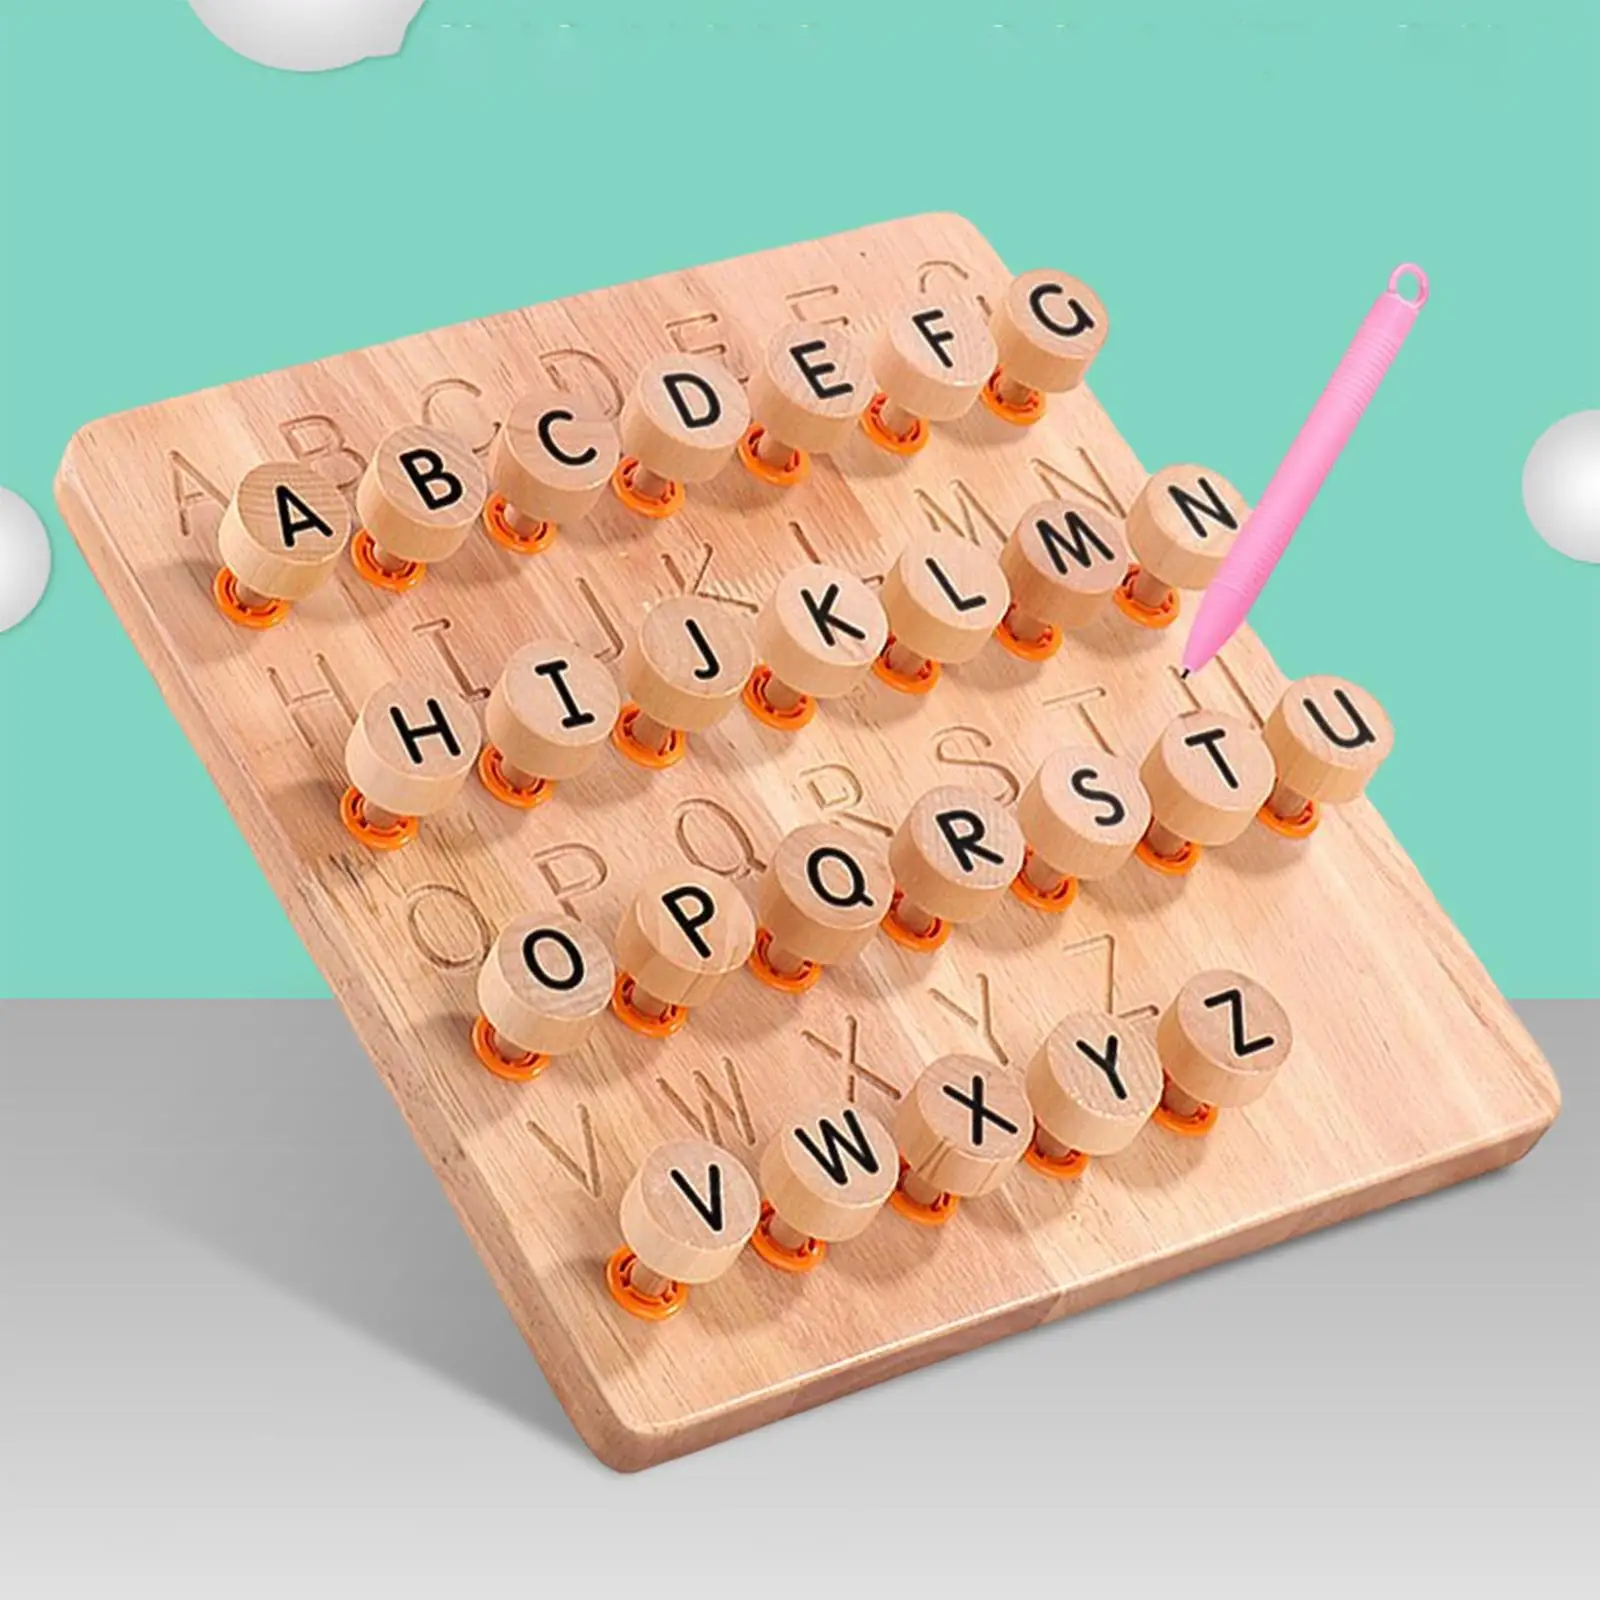 Wooden Alphabet Tracing Board Montessori Toys Sensory Game Writing Aids for Gift Early Learning 3+ Years Kids Boys